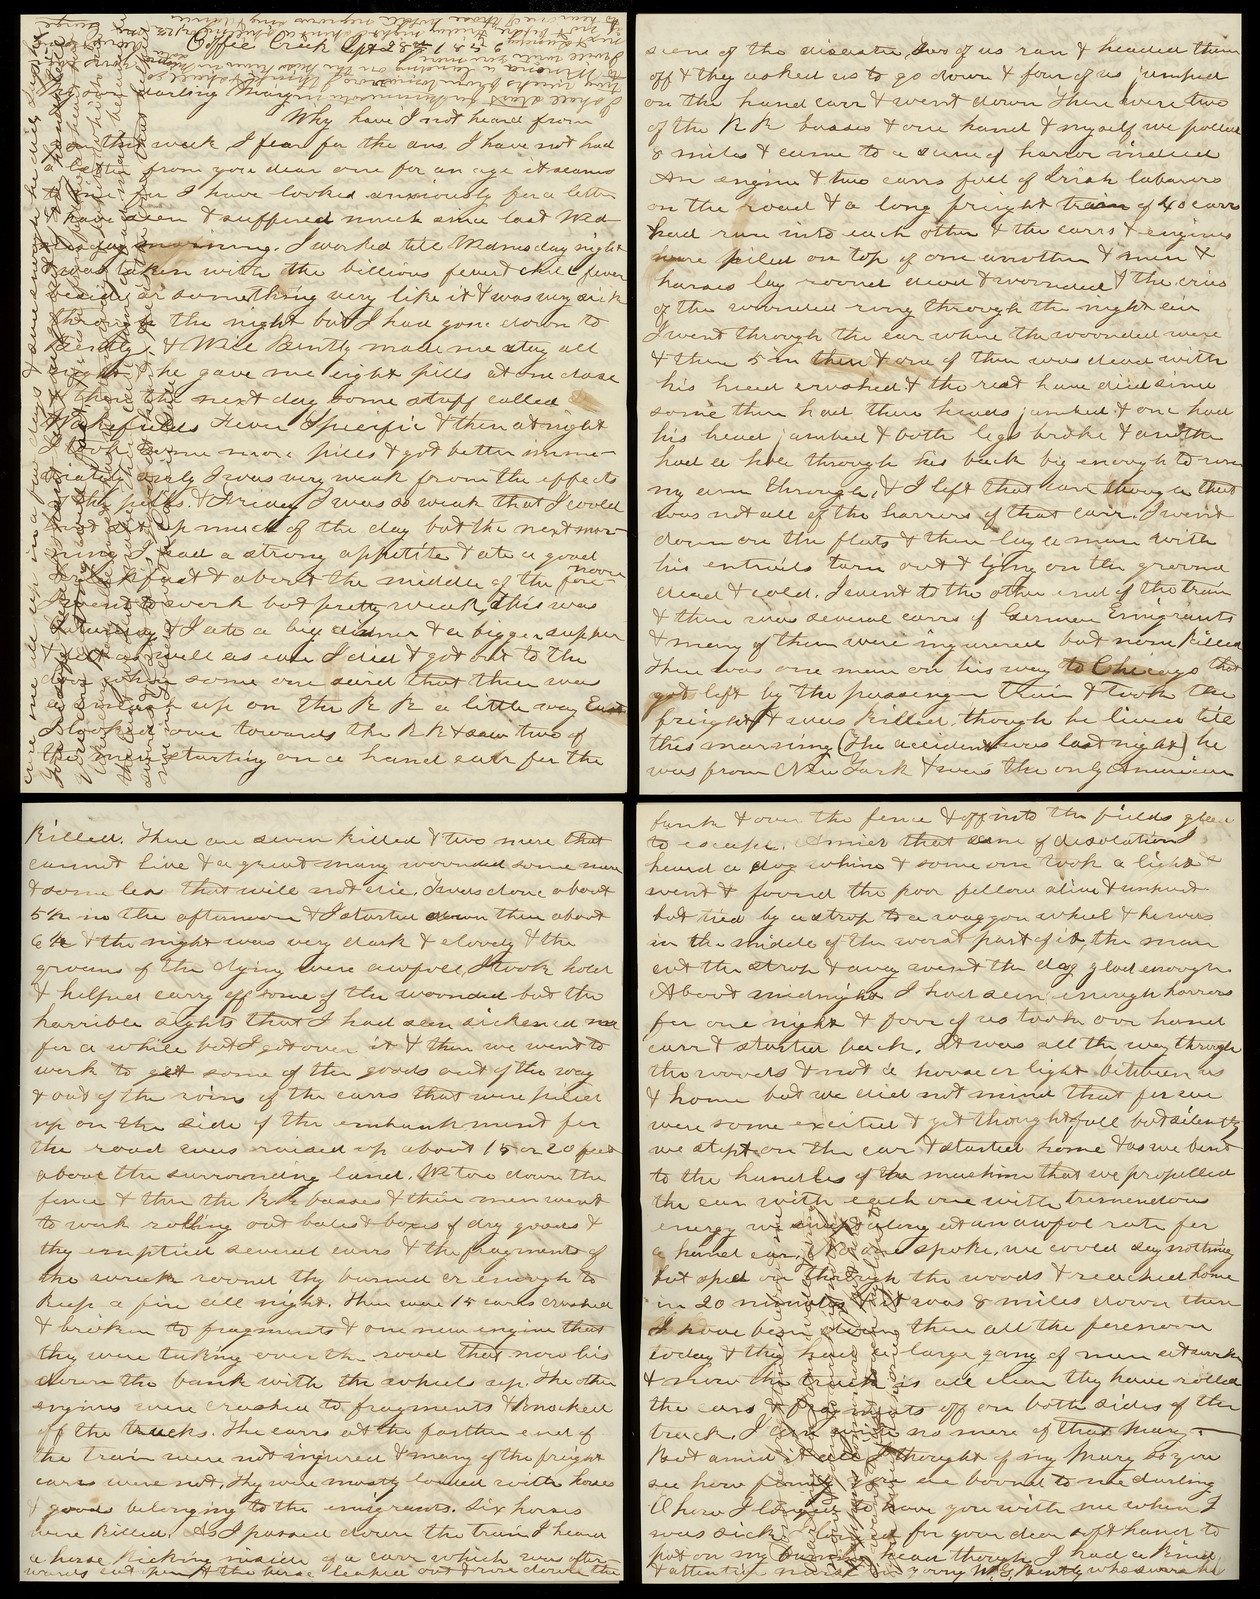 Letter from George H. Spooner to his wife, Mary, September 28, 1856 - Coffee Creek, Indiana